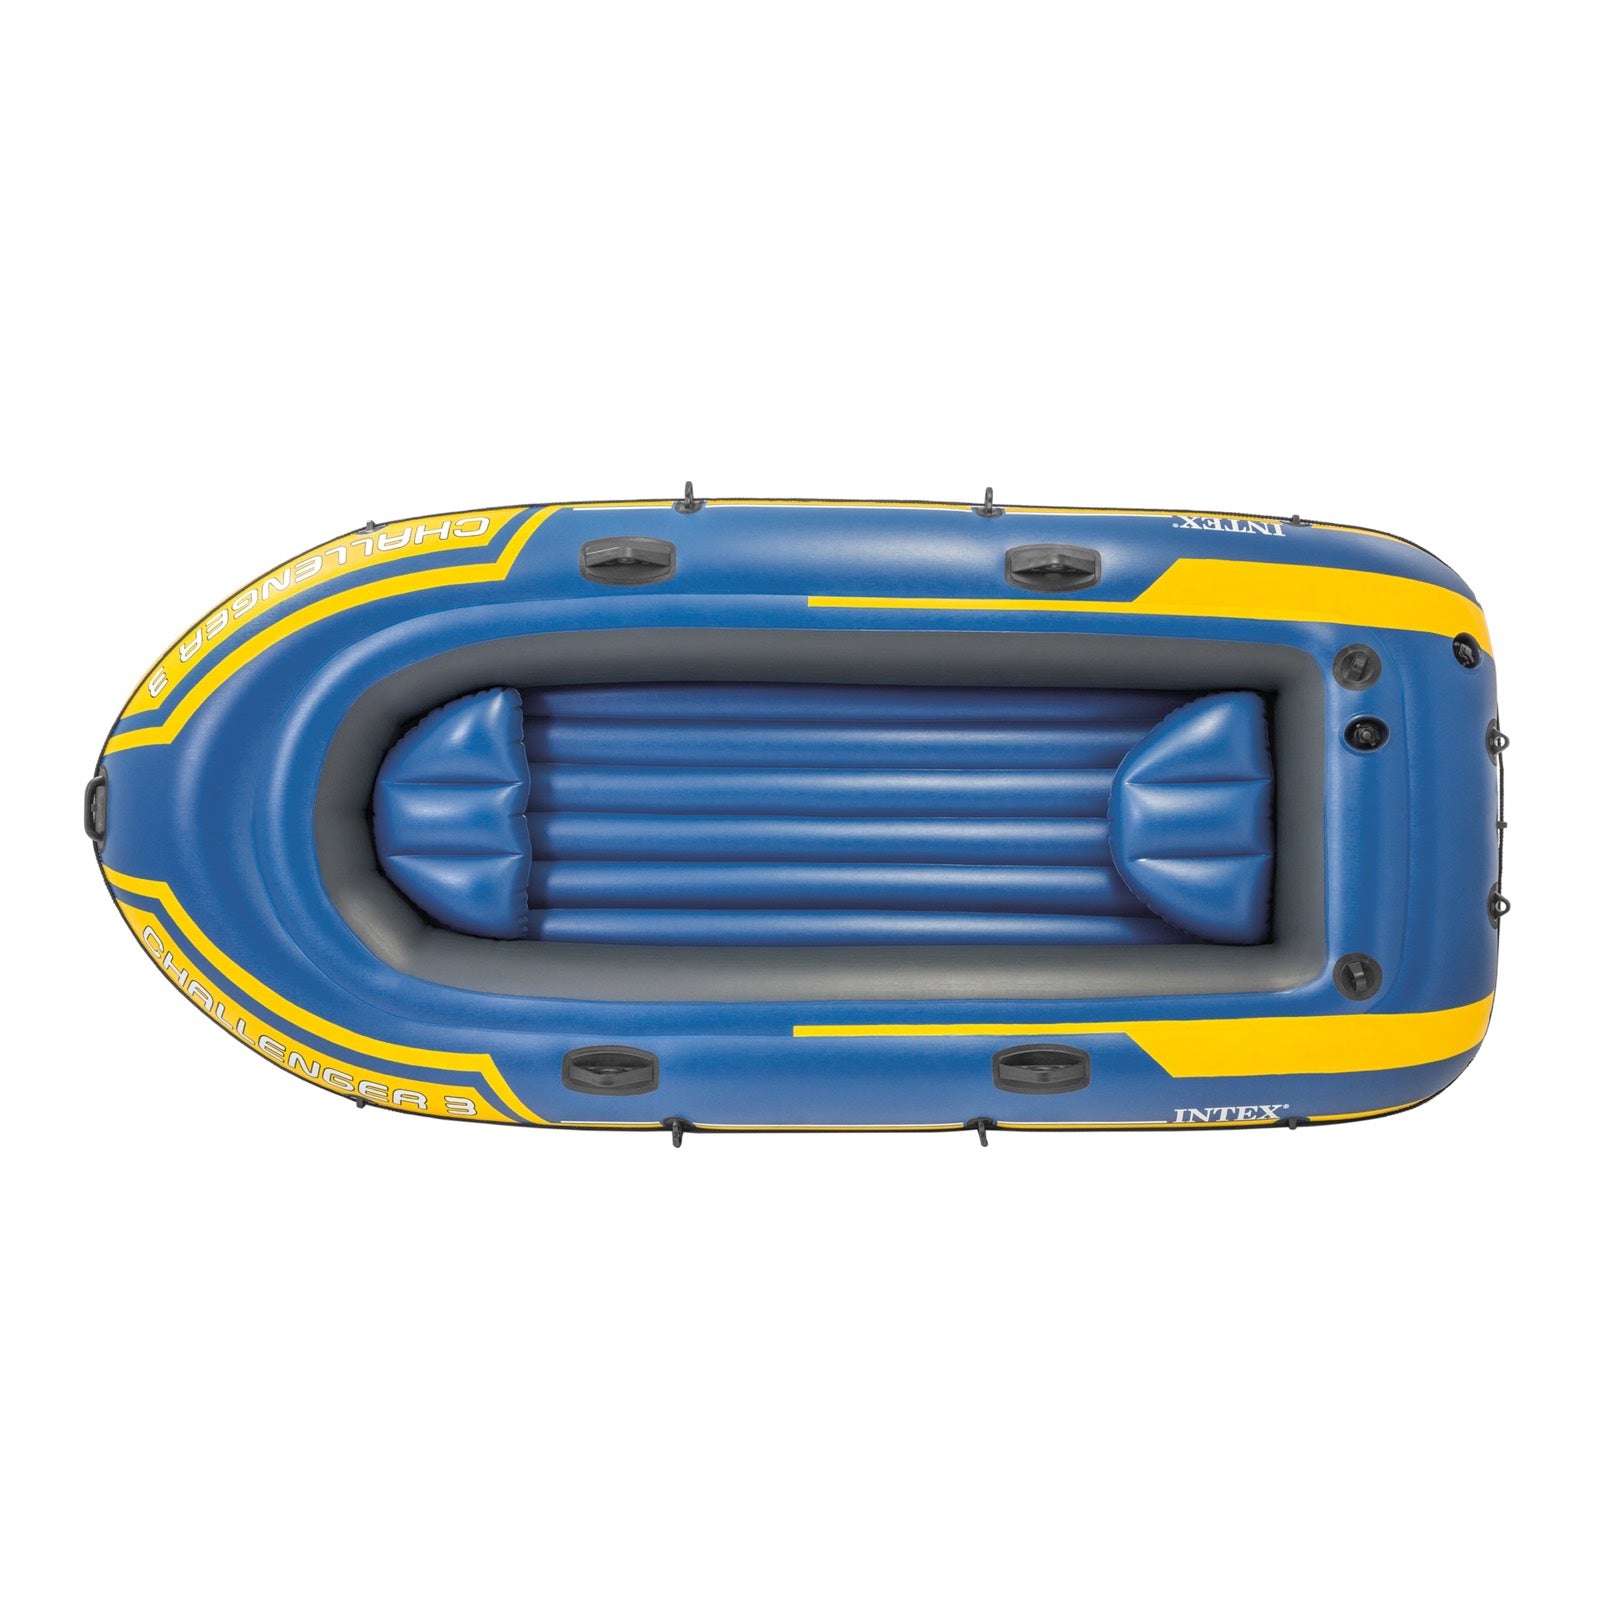 Bote Inflable INTEX Challenger 3, 2.95m x 1.37m x 43cm